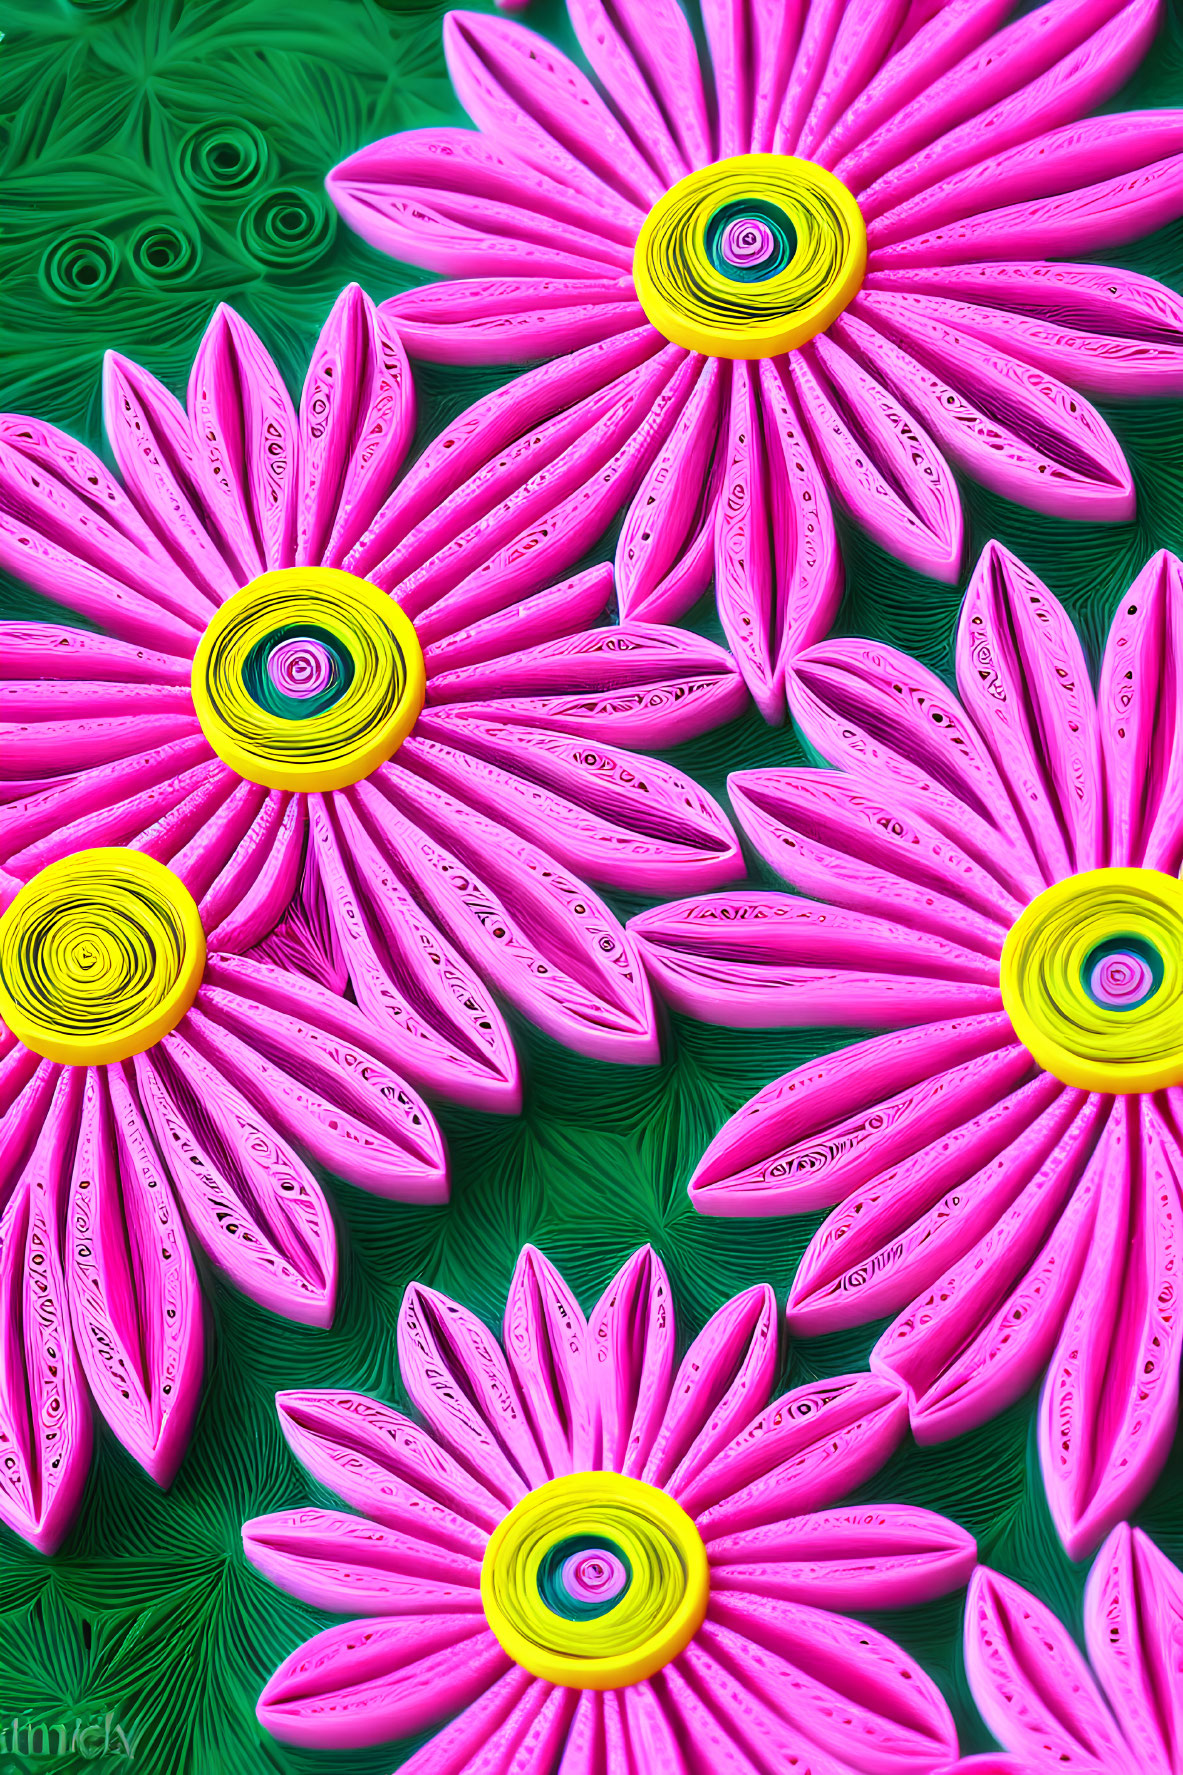 Pink Paper Quilled Flowers on Textured Green Background